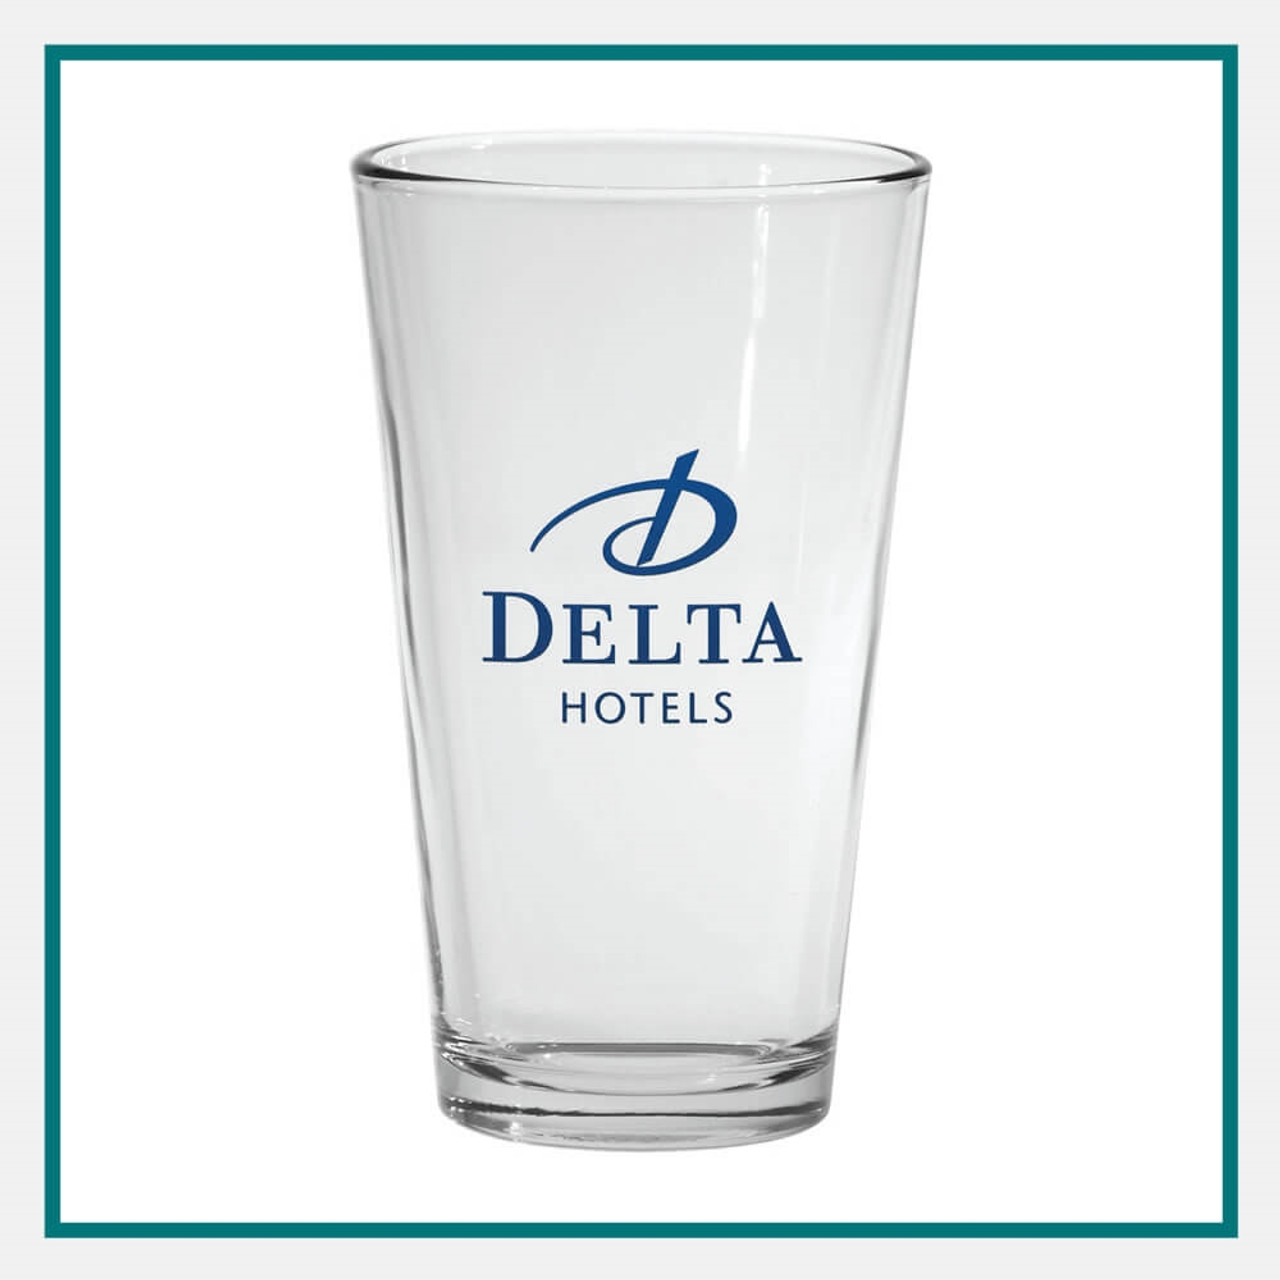 Personalized 16 Oz Full Color Pint Glasses